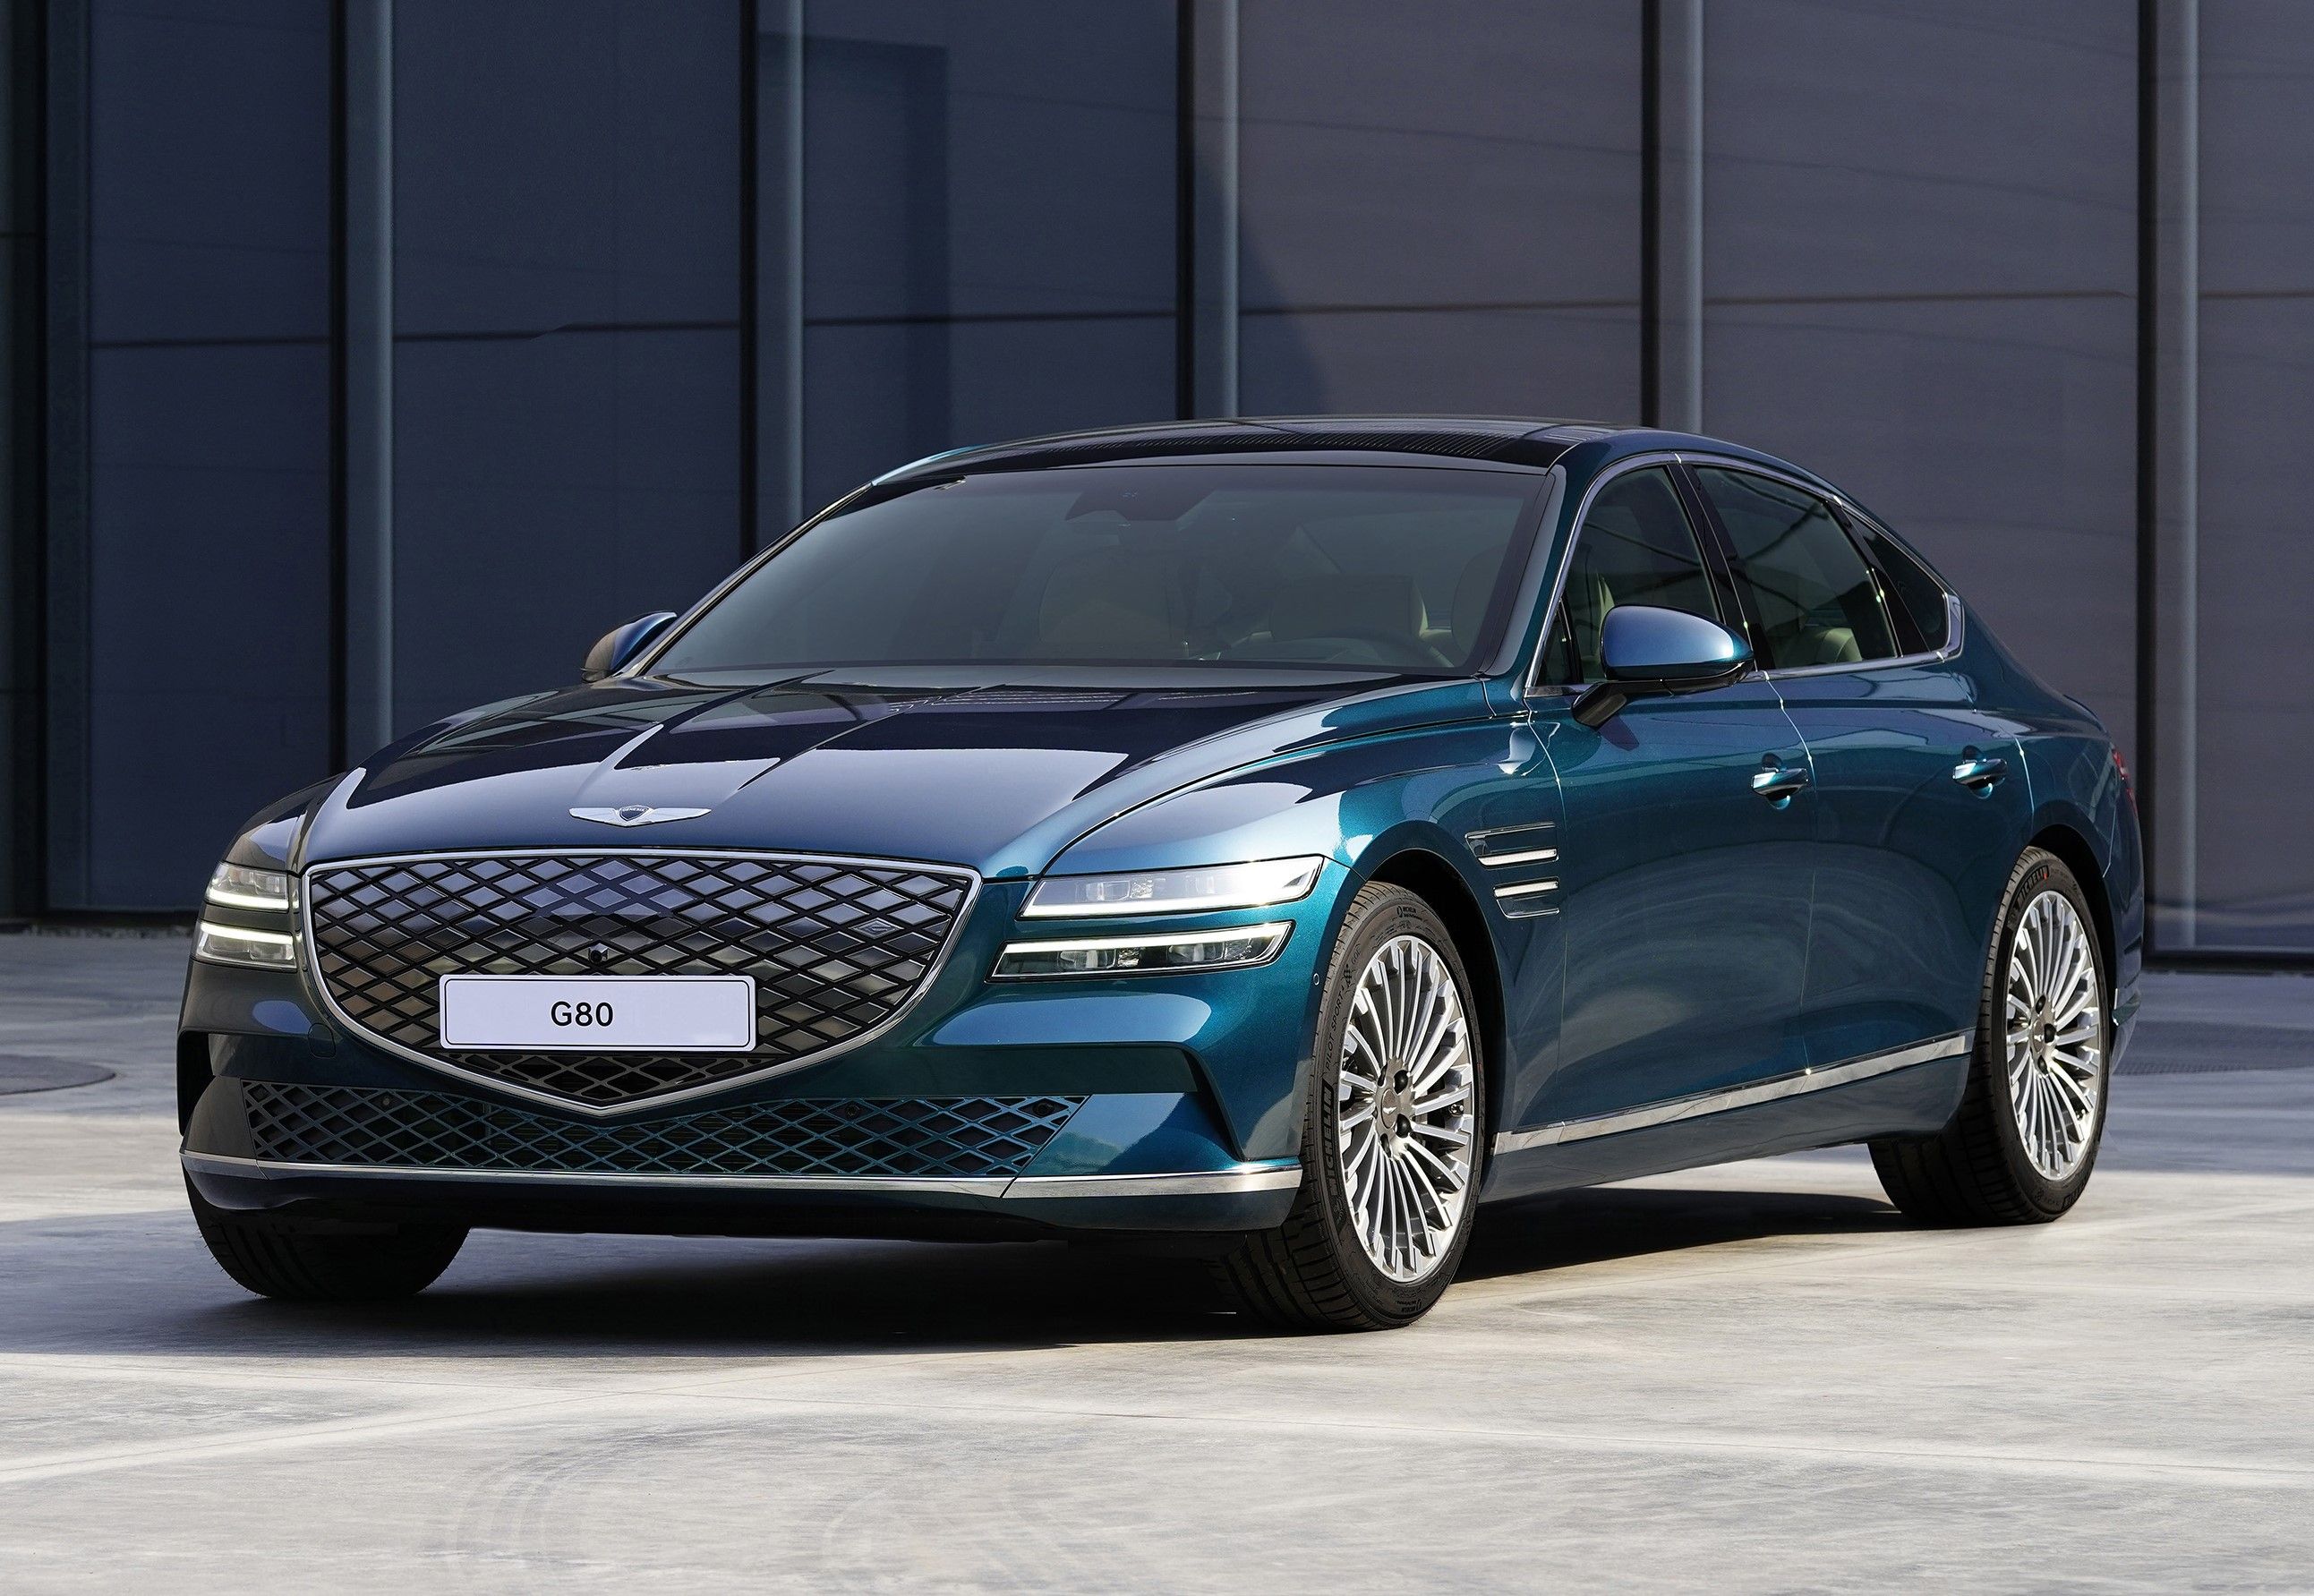 The 2023 Genesis Electrified G80 front view.